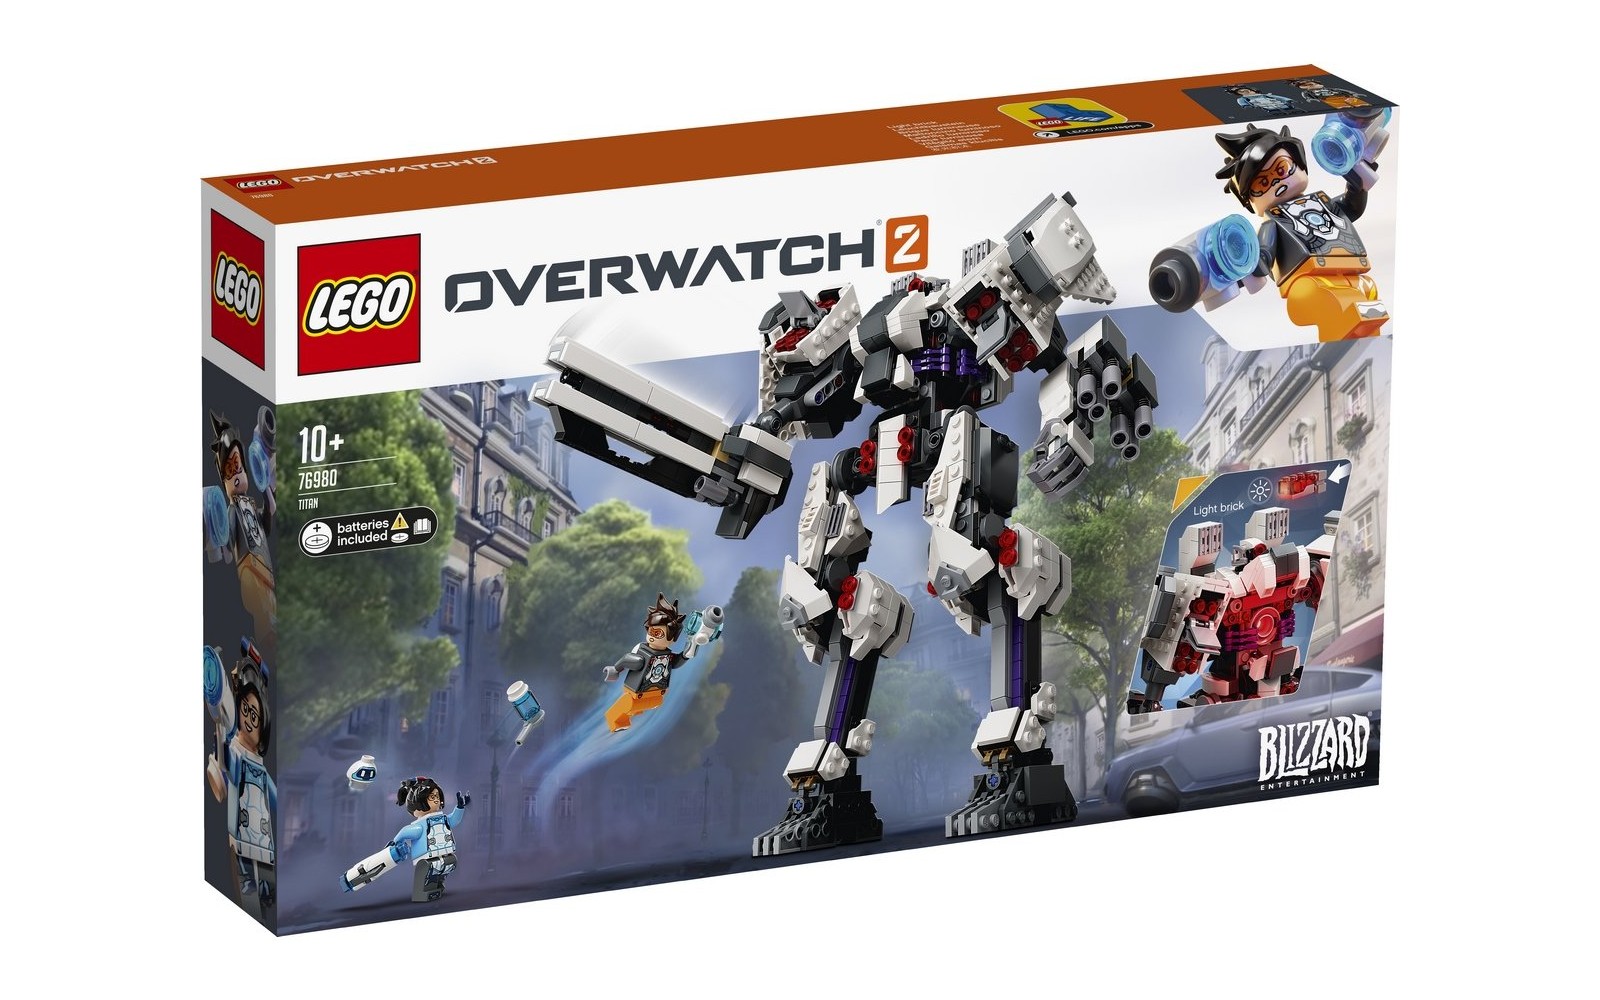 Lego delays 'Overwatch 2' set amid Activision Blizzard sexual harassment scandal